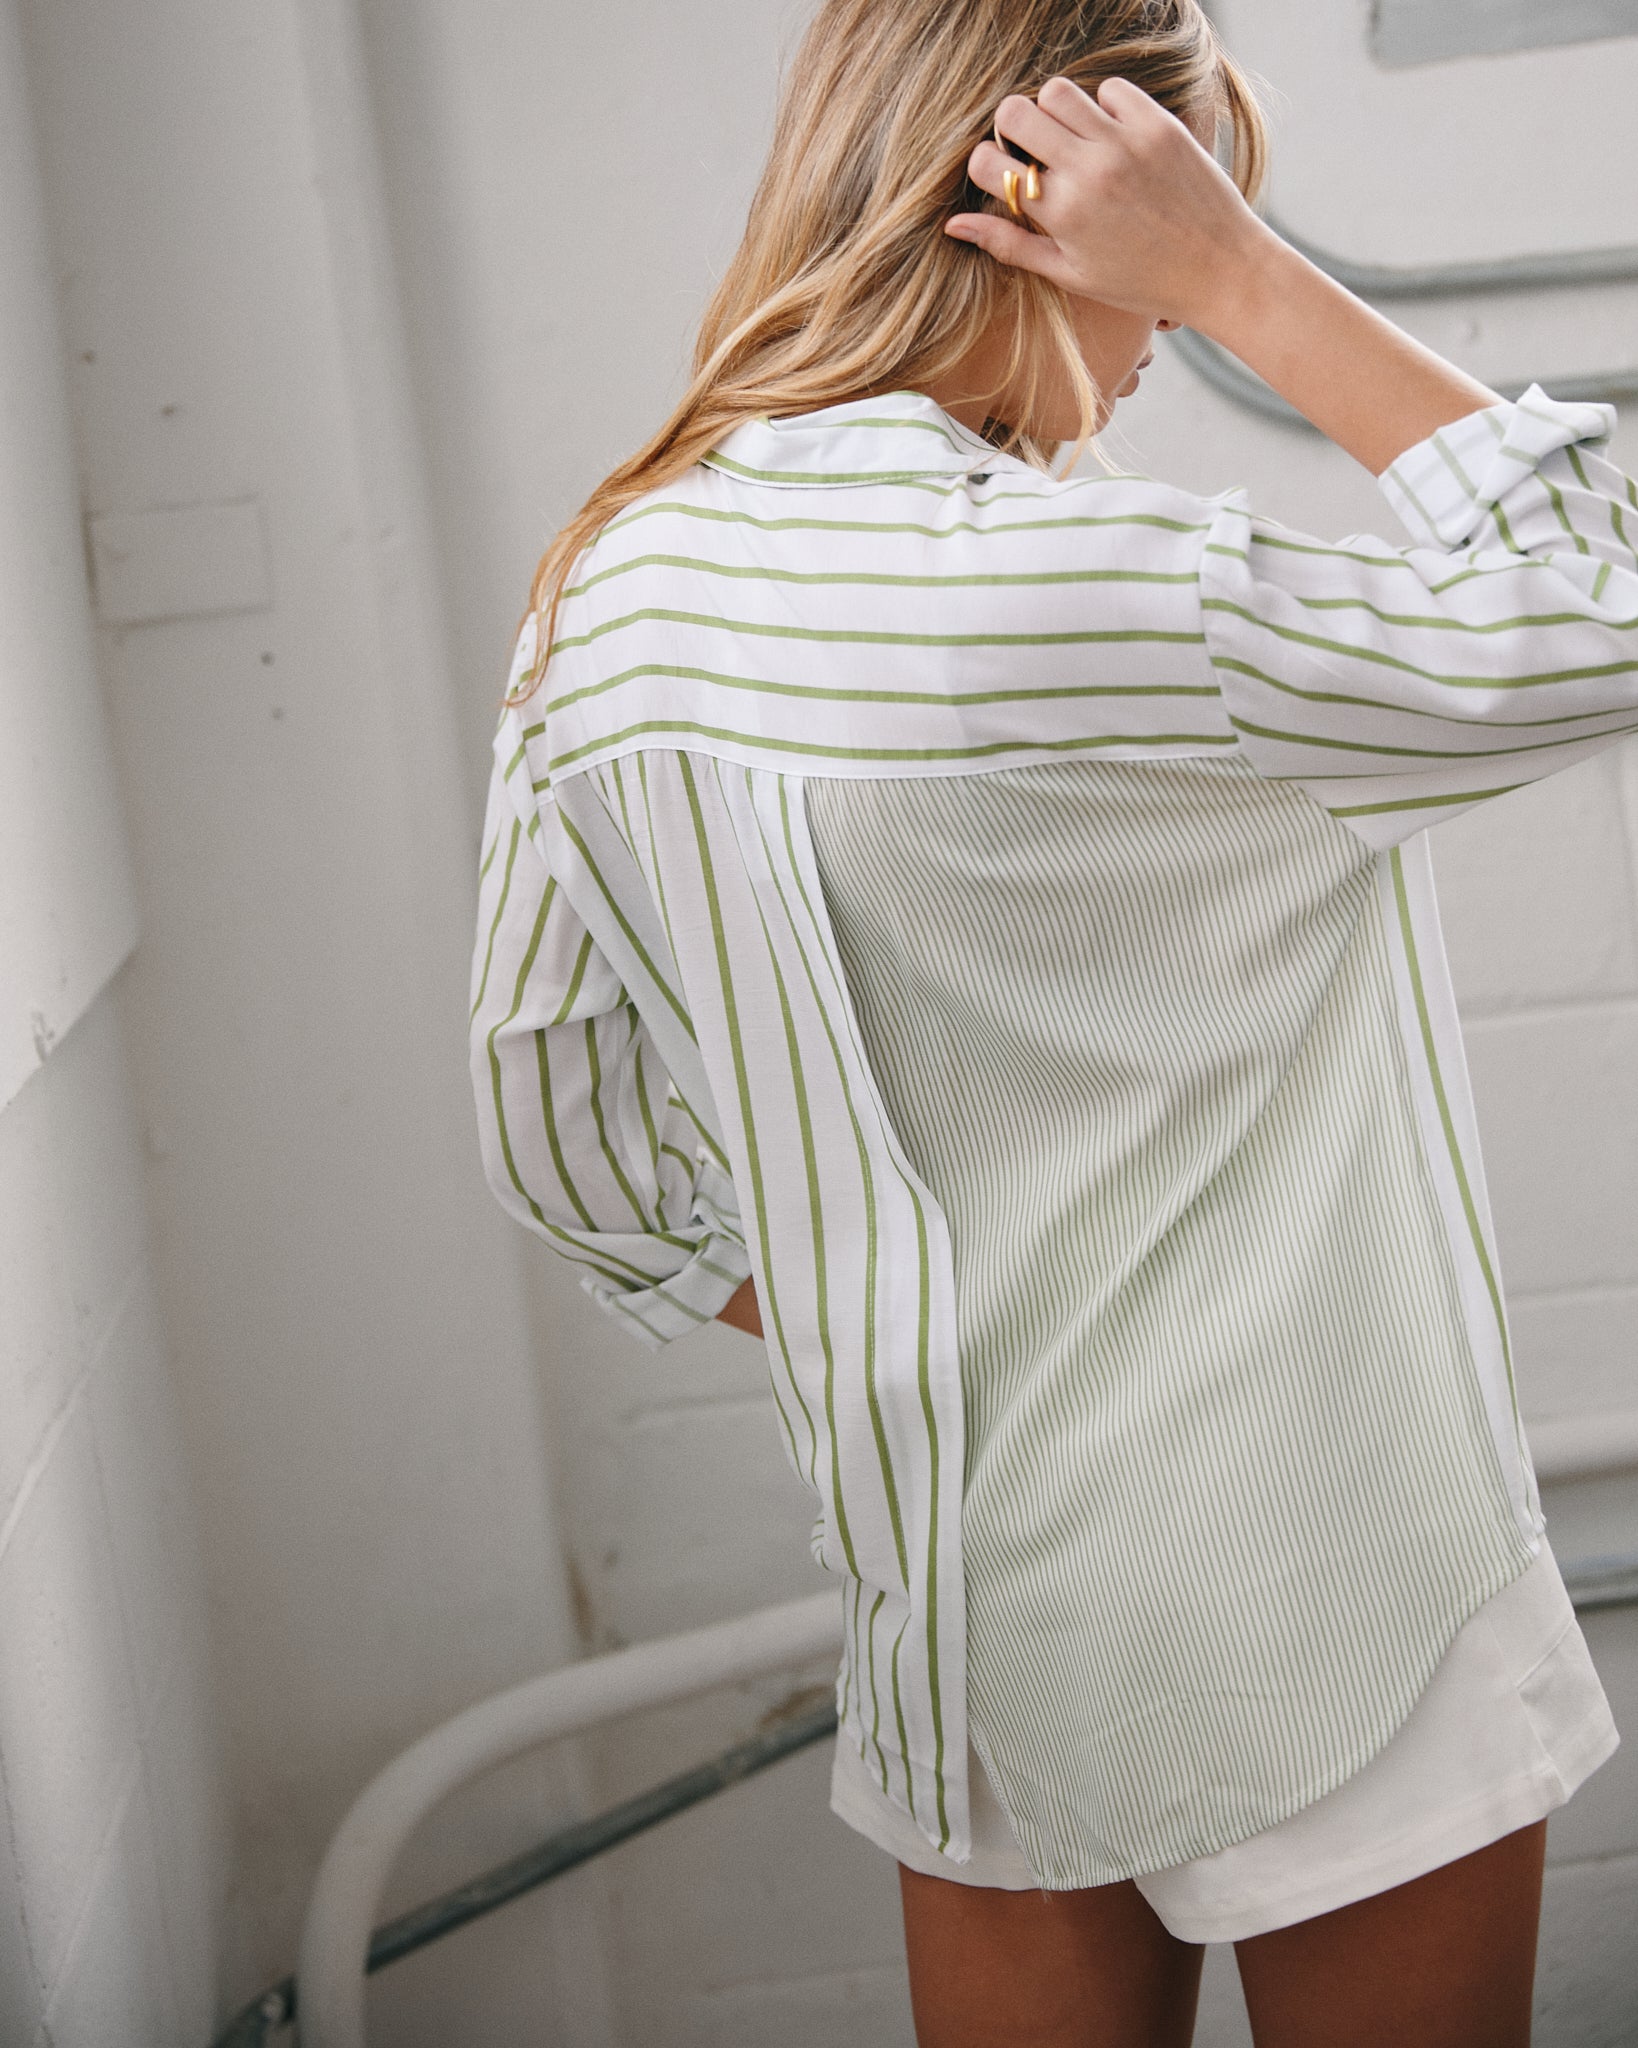 Contrasting Stripes Top